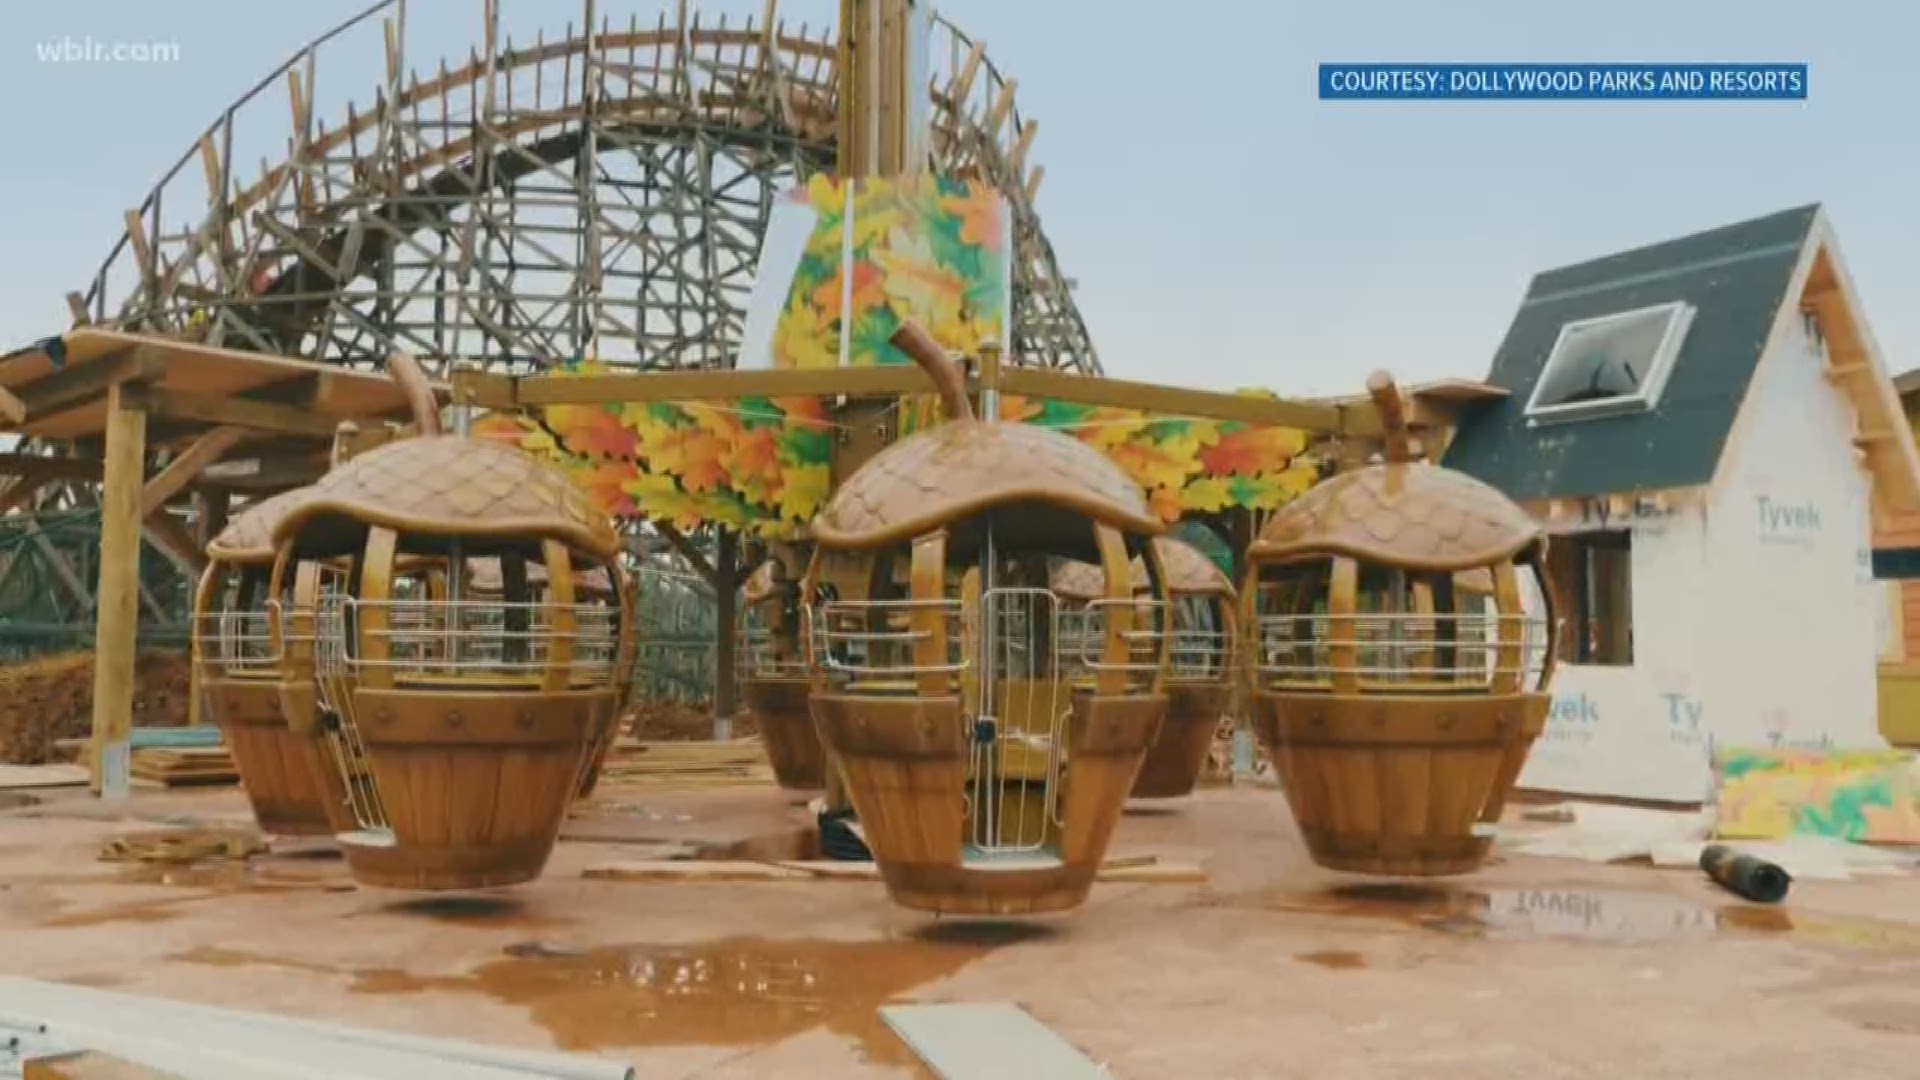 Dollywood's newest expansion opens Saturday, and the park offered a sneak peek ahead of time.